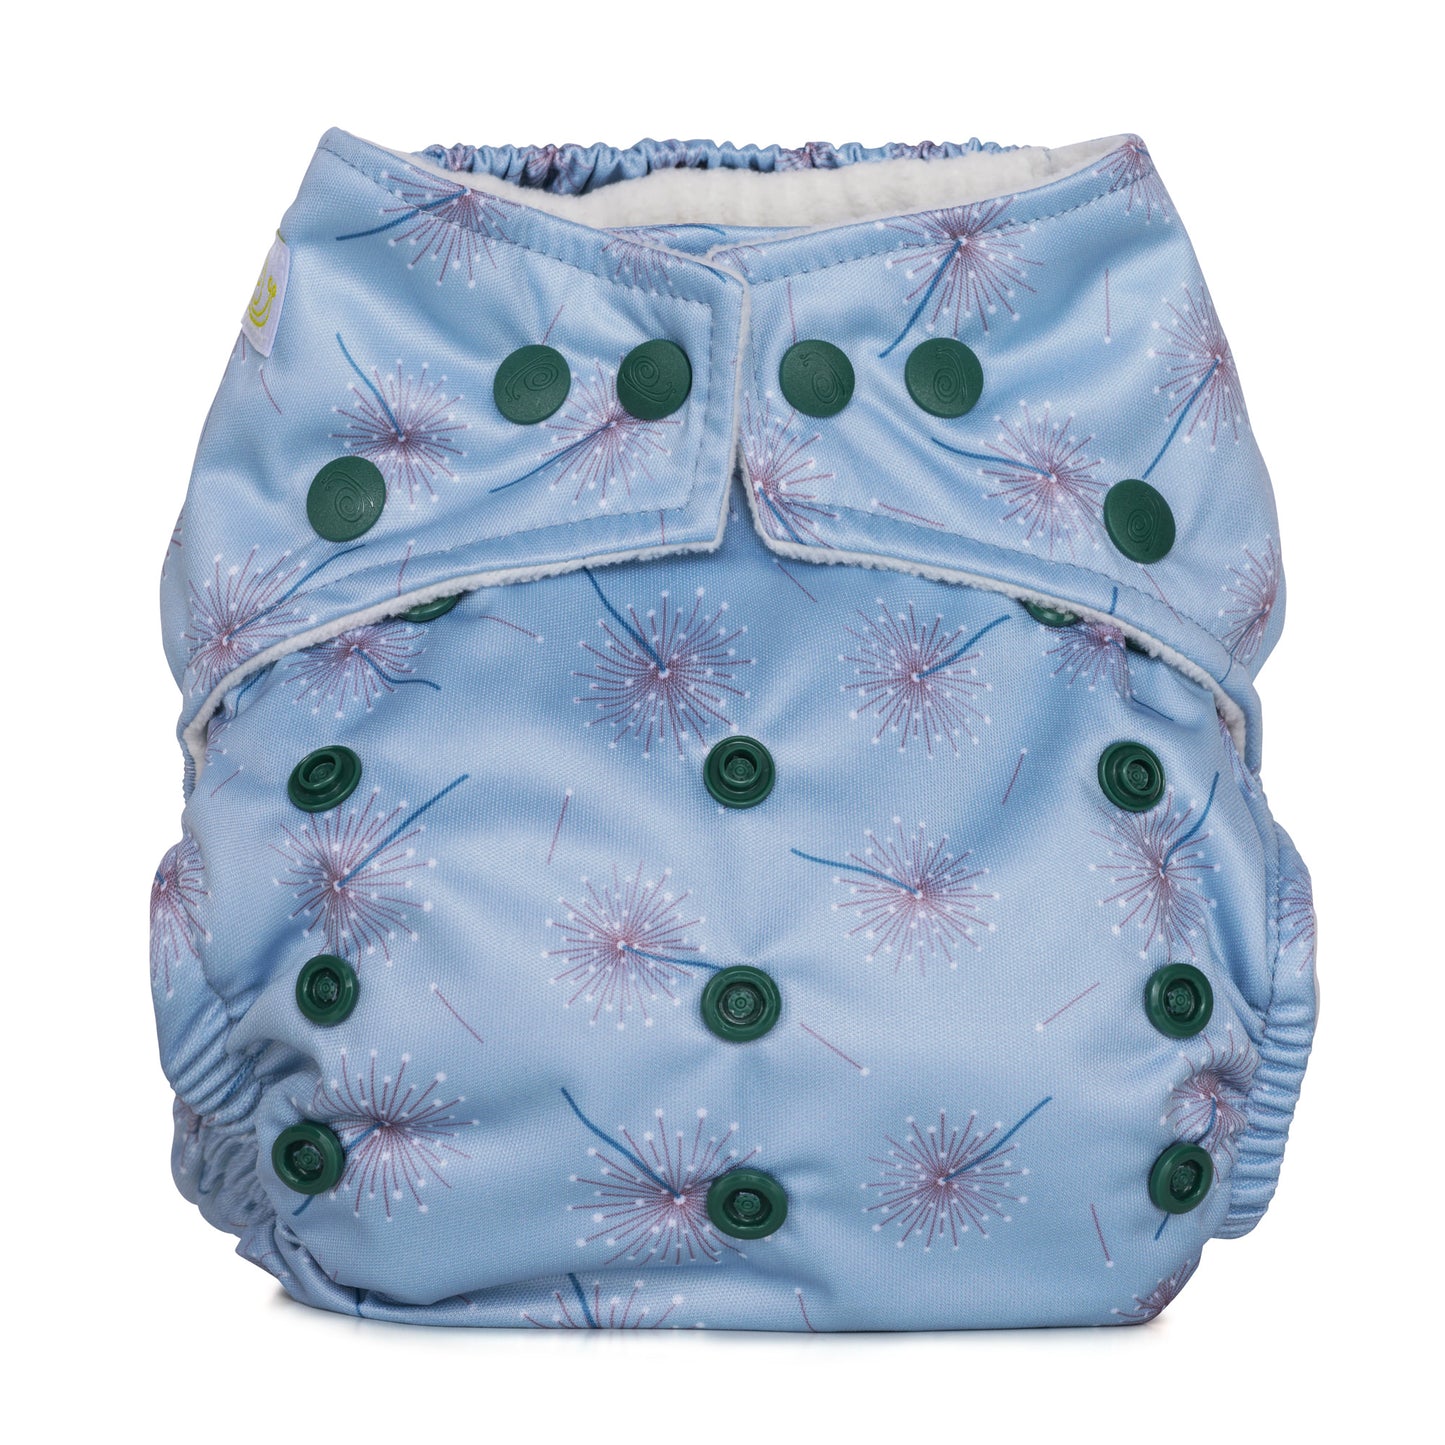 Pale blue reusable cloth nappy with dandelion print and poppers around the waist and rise snaps across the front.